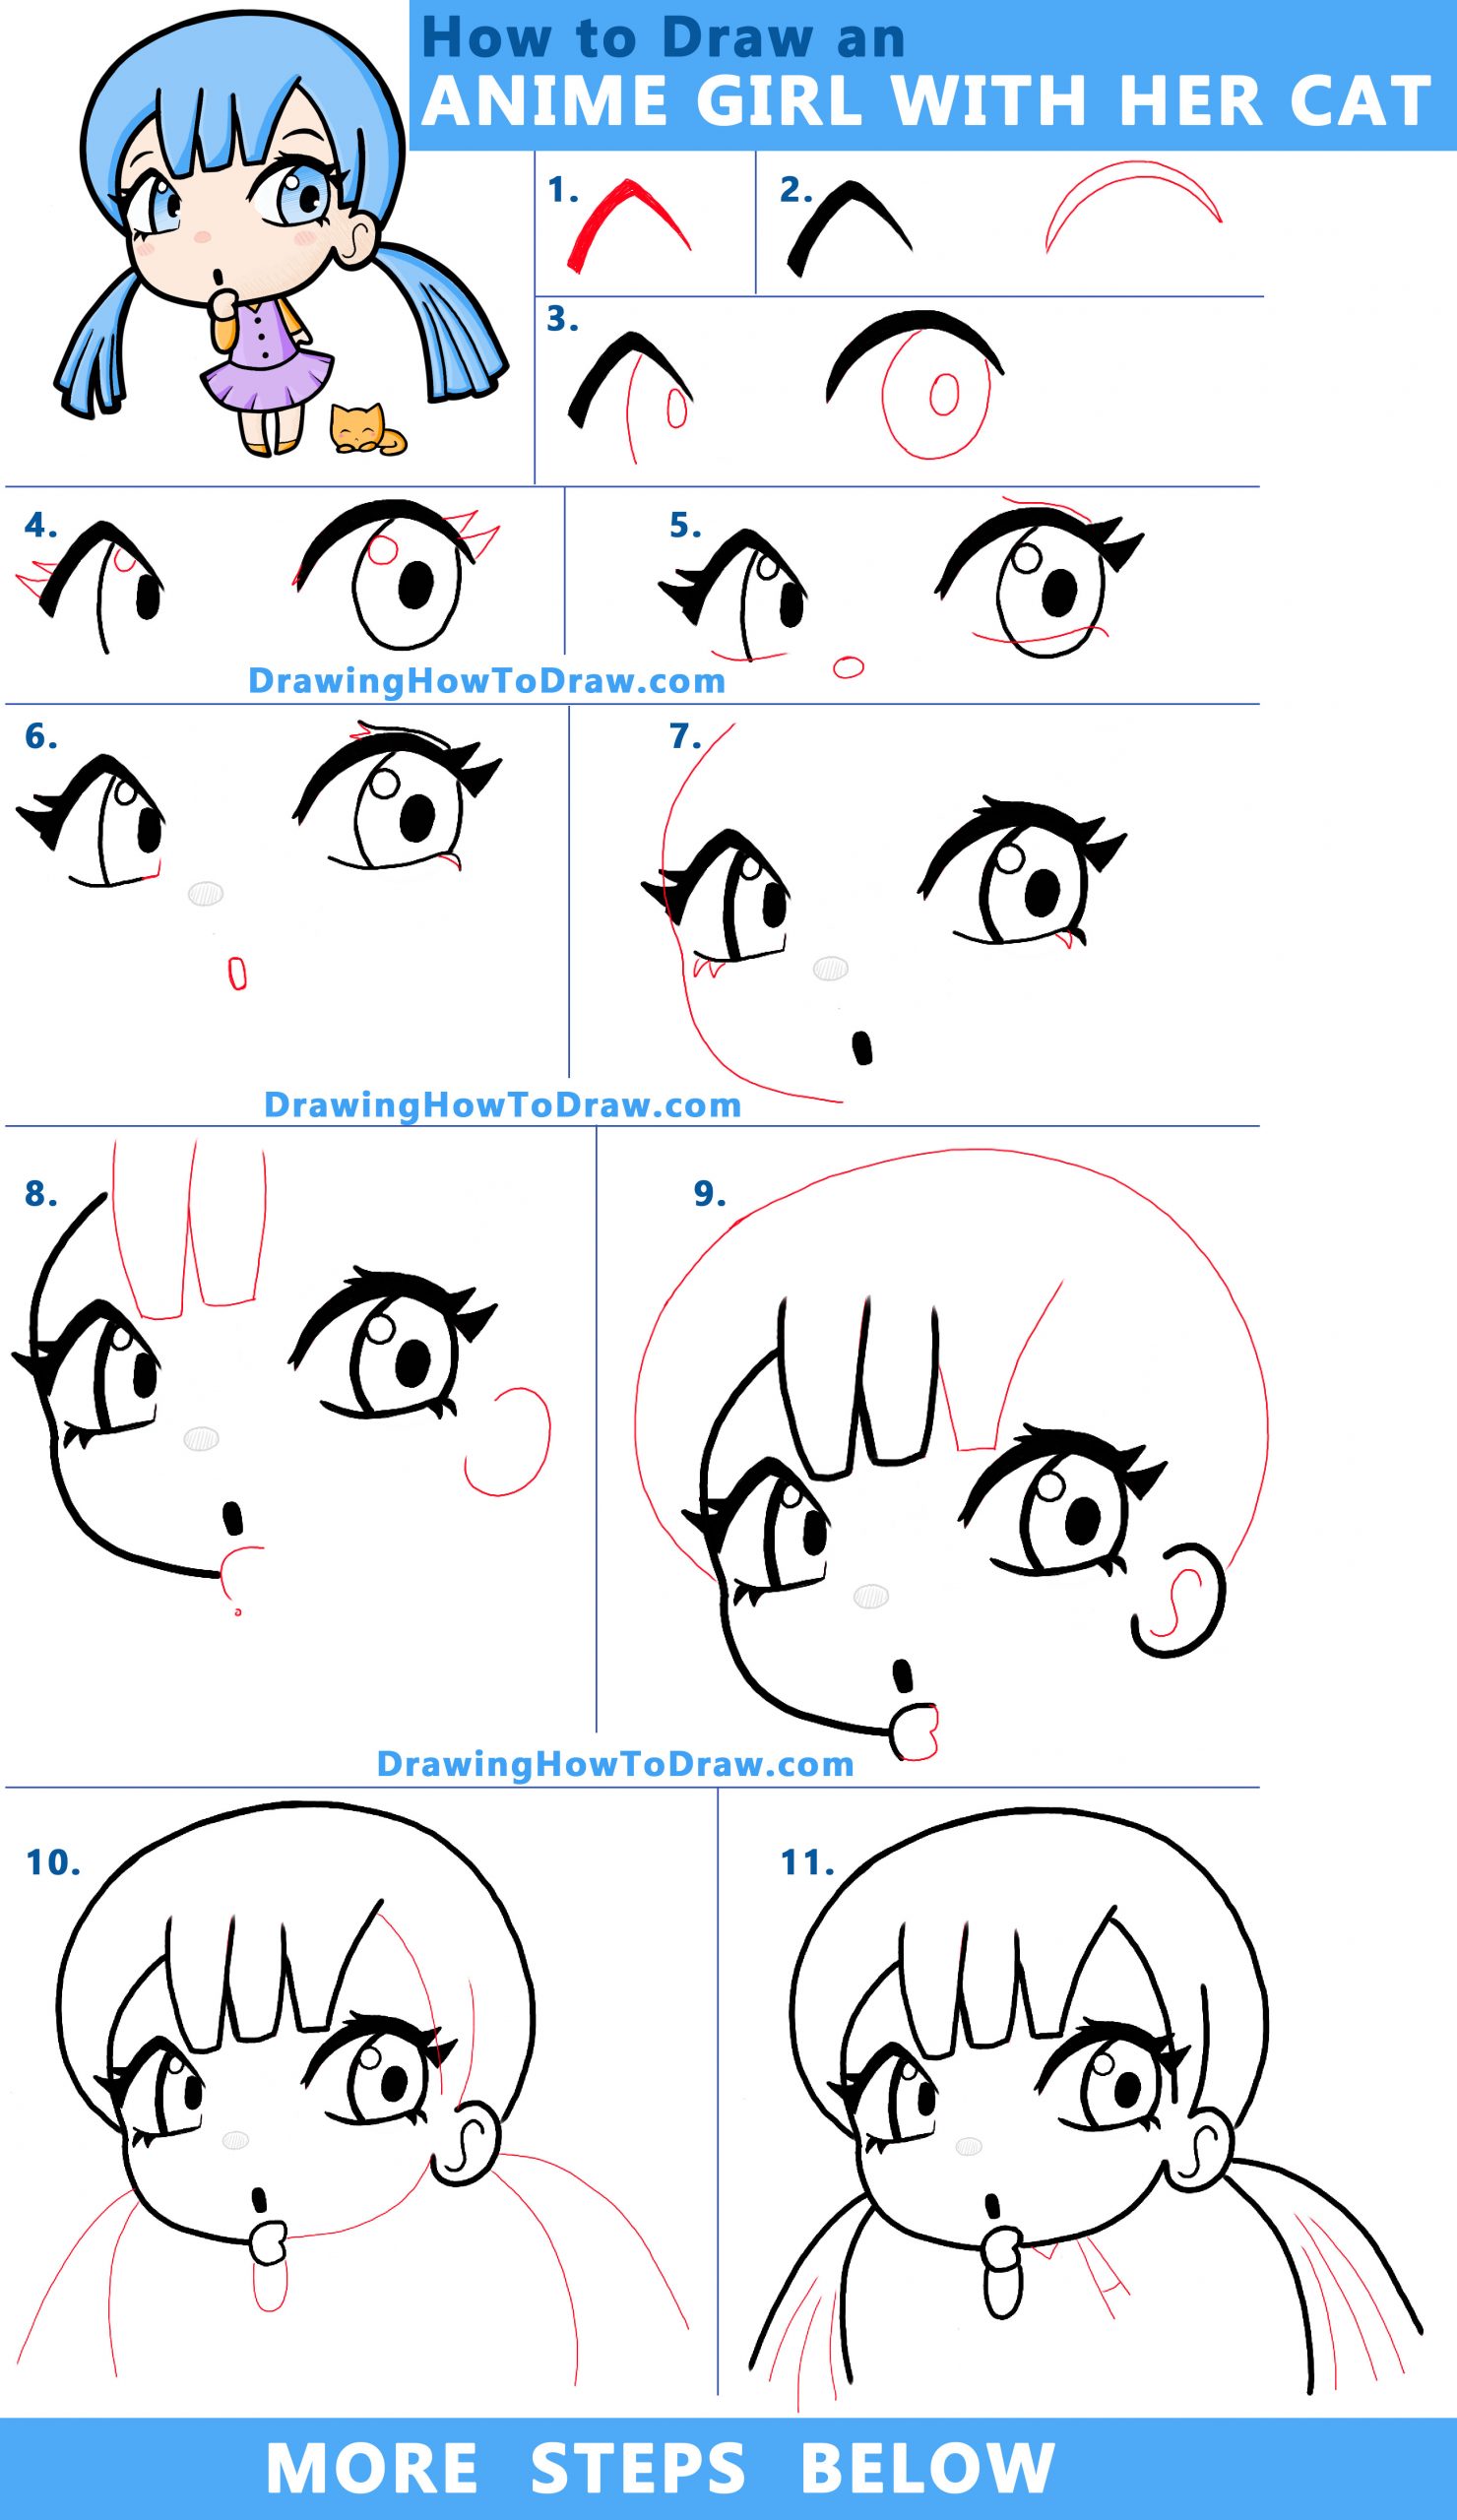 How to Draw a Cute Manga / Anime / Chibi Girl with her Kitty Cat - Easy Step by Step Drawing Lesson